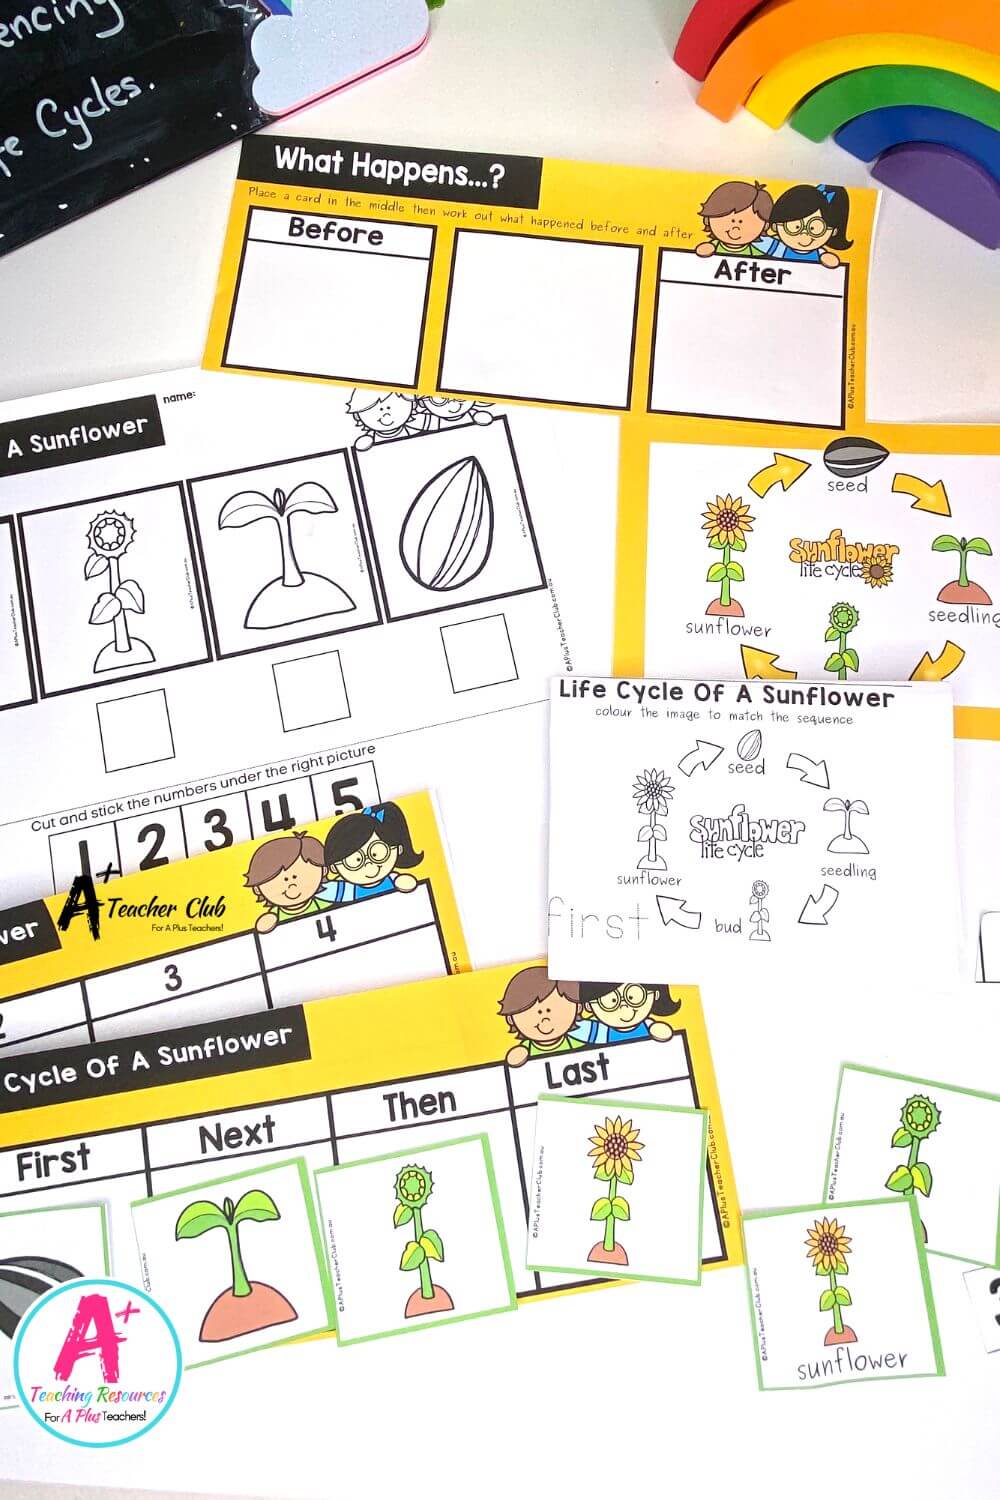 Life Cycle Sequencing 4 Steps - Sunflower Activities Pack